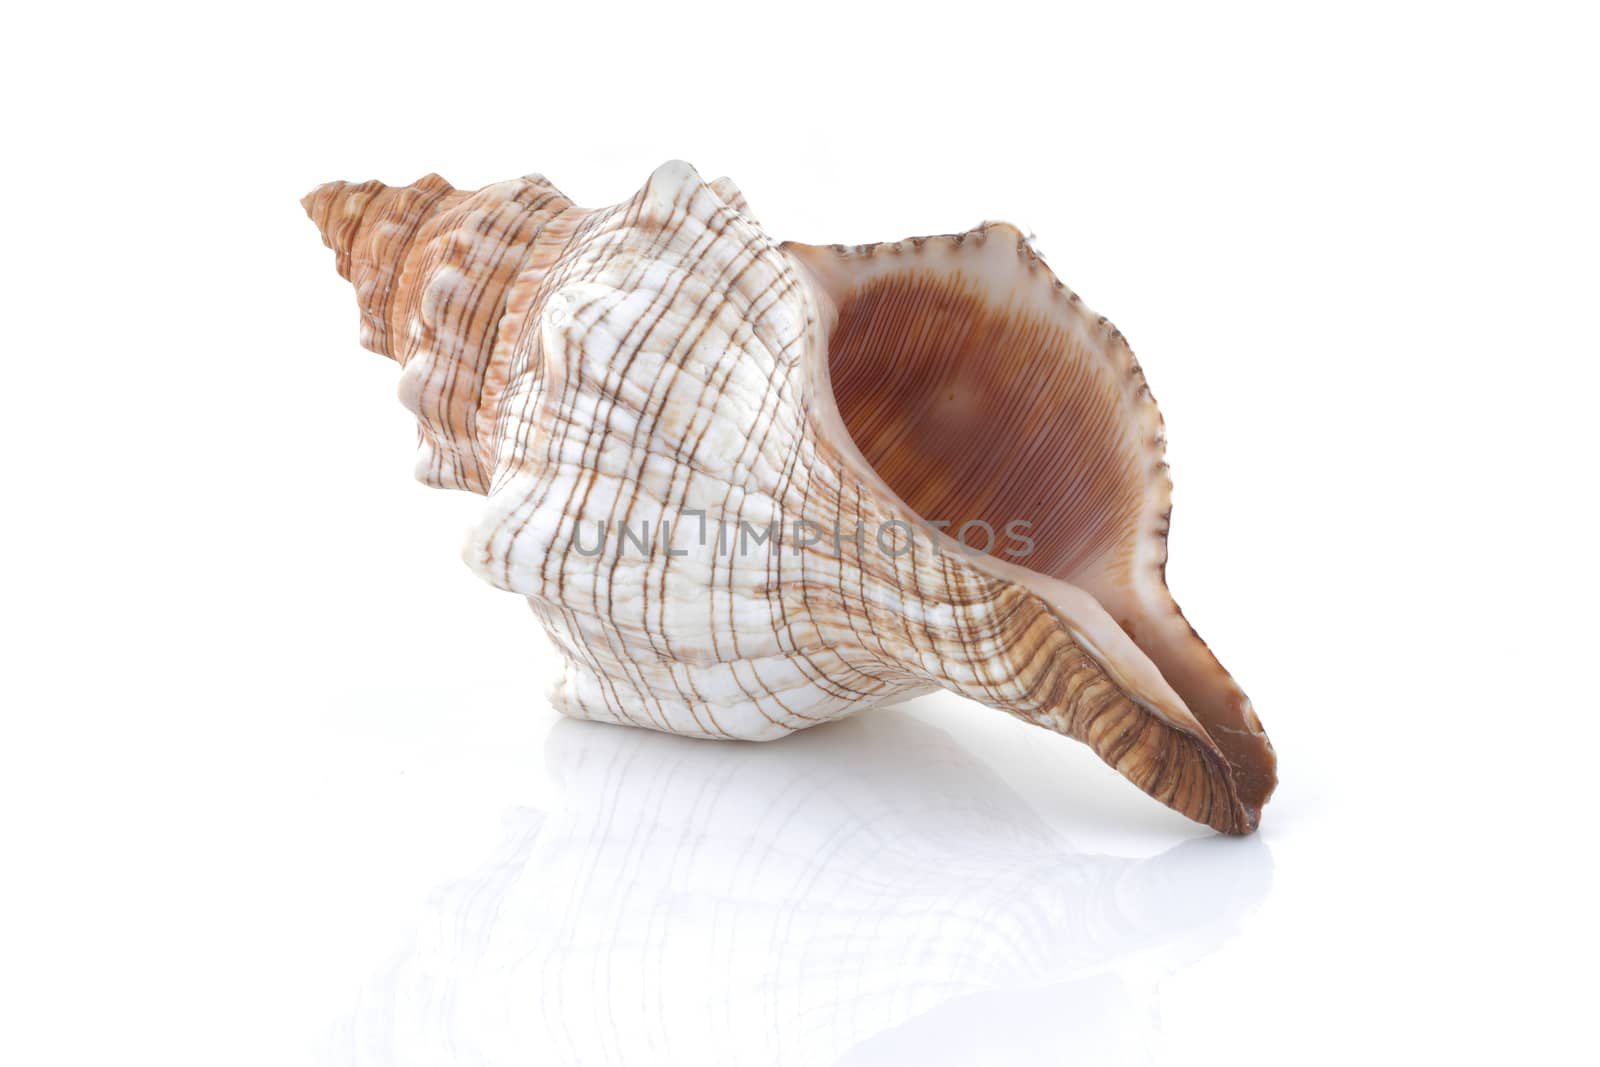 A Conch shell isolated on white with reflection